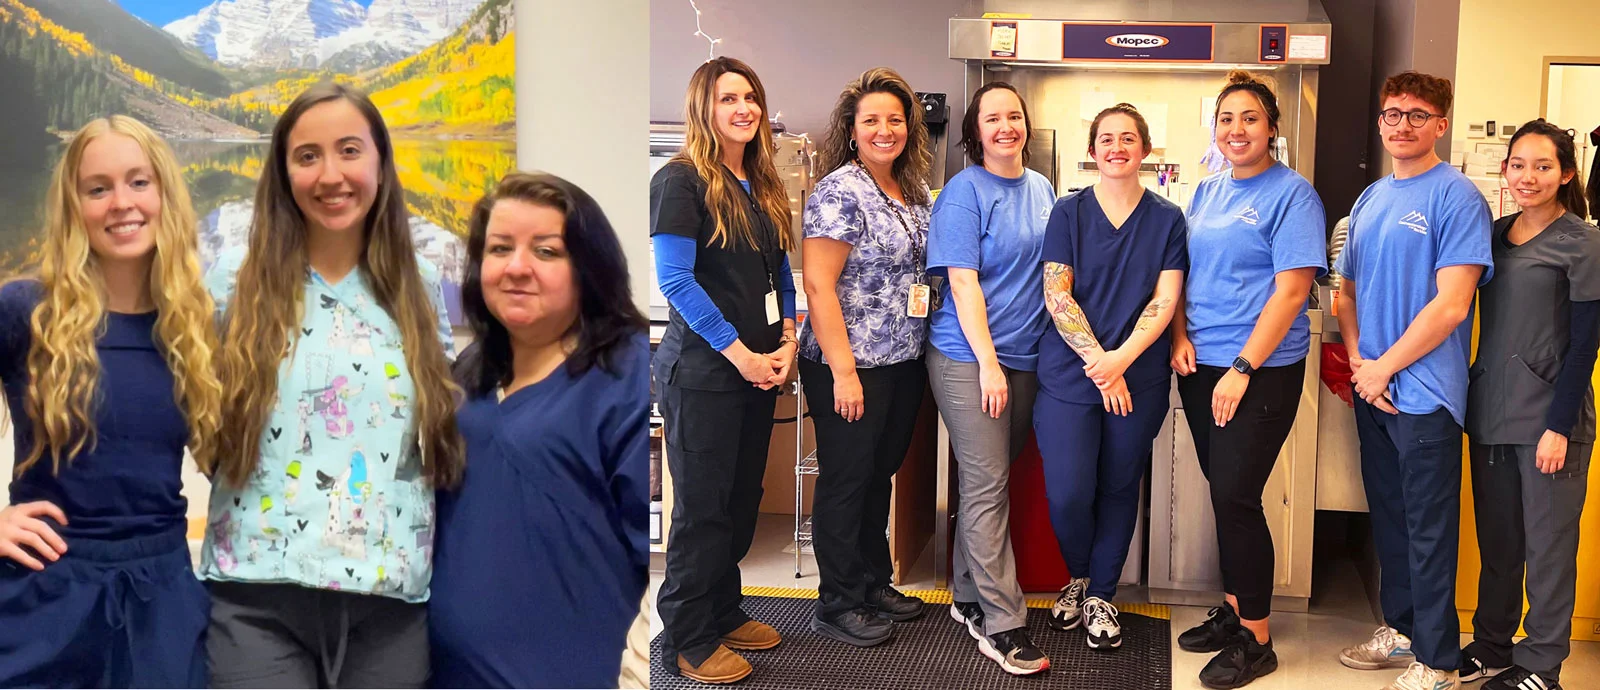 Dress In Blue Day 2023: Raising Awareness for Colorectal Cancer Awareness Month